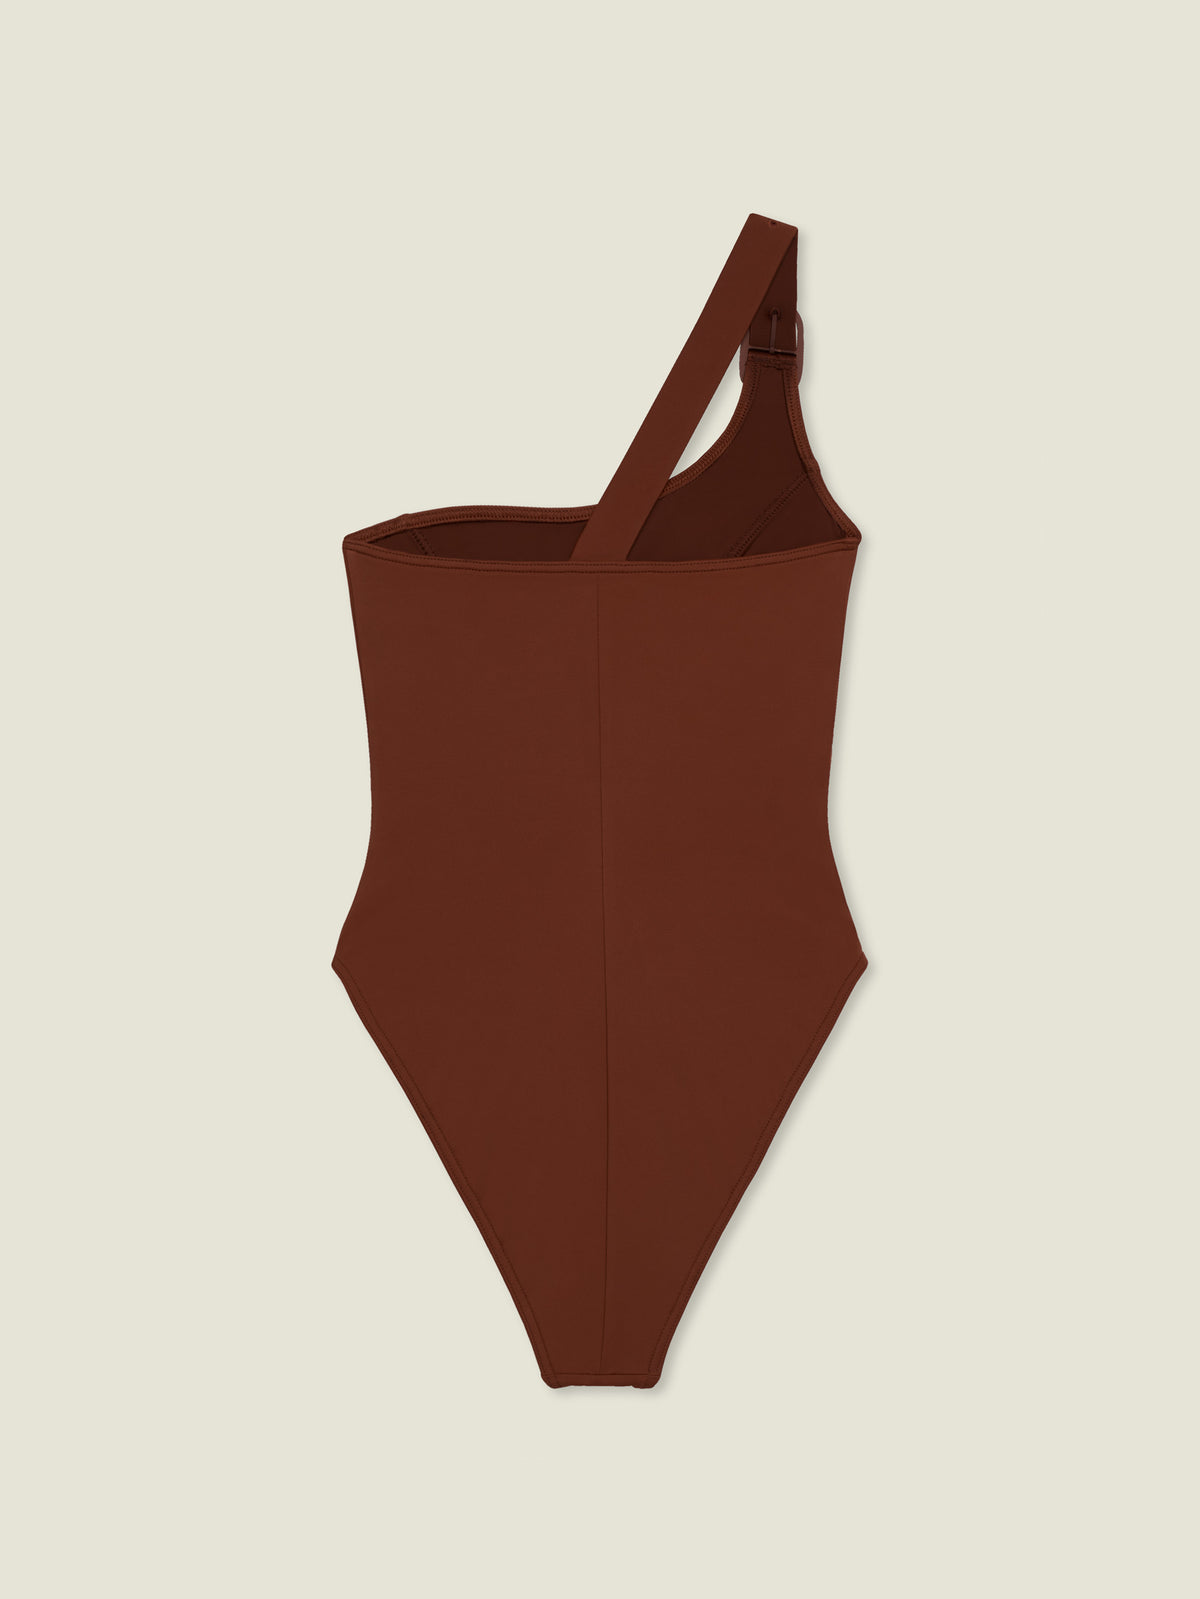 Captain – Earth Brown swimsuit one piece